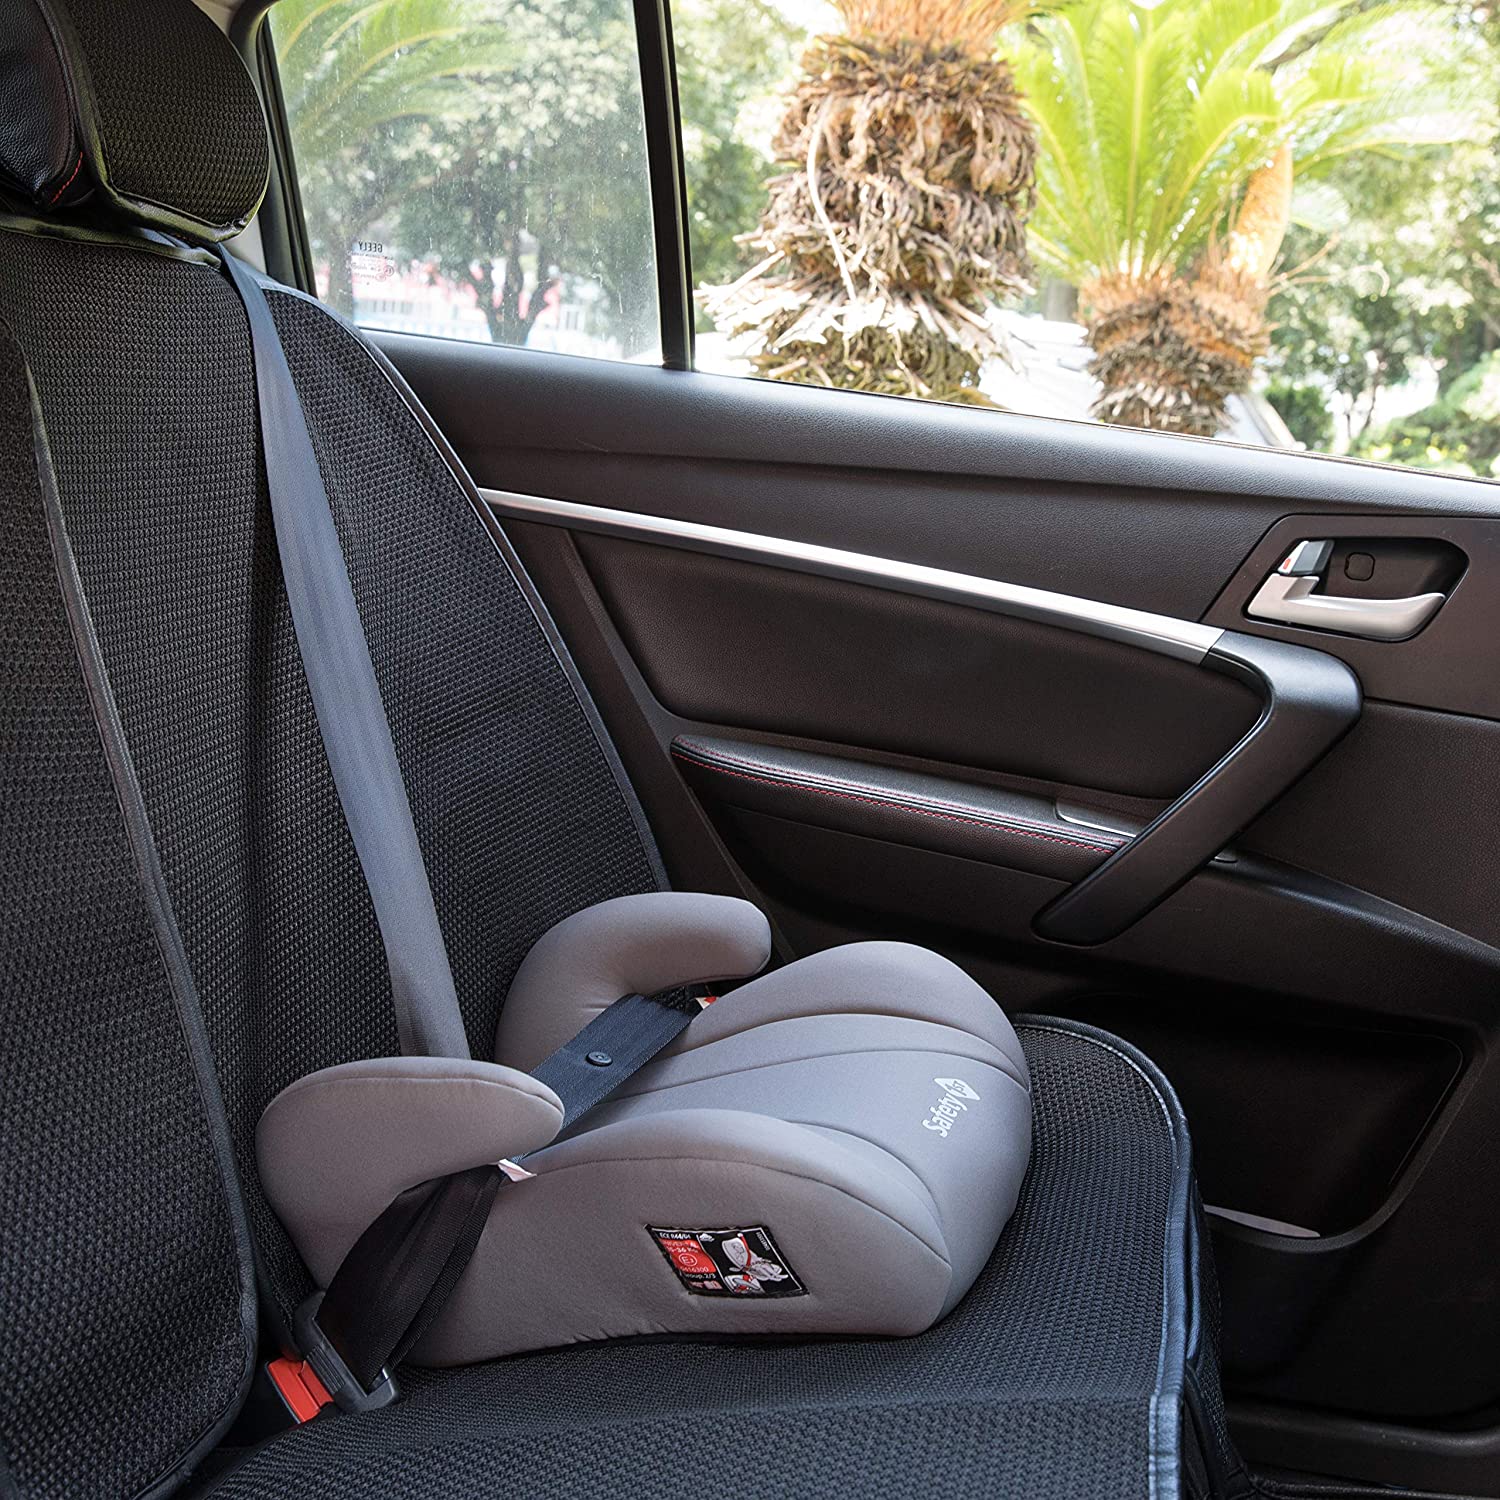 Safety 1st Manga or Manga Fix child seat, practical group 2/3 booster seat with or without ISOFIX connection (15-36 kg), suitable for children from approx. 3.5 to approx. 12 years